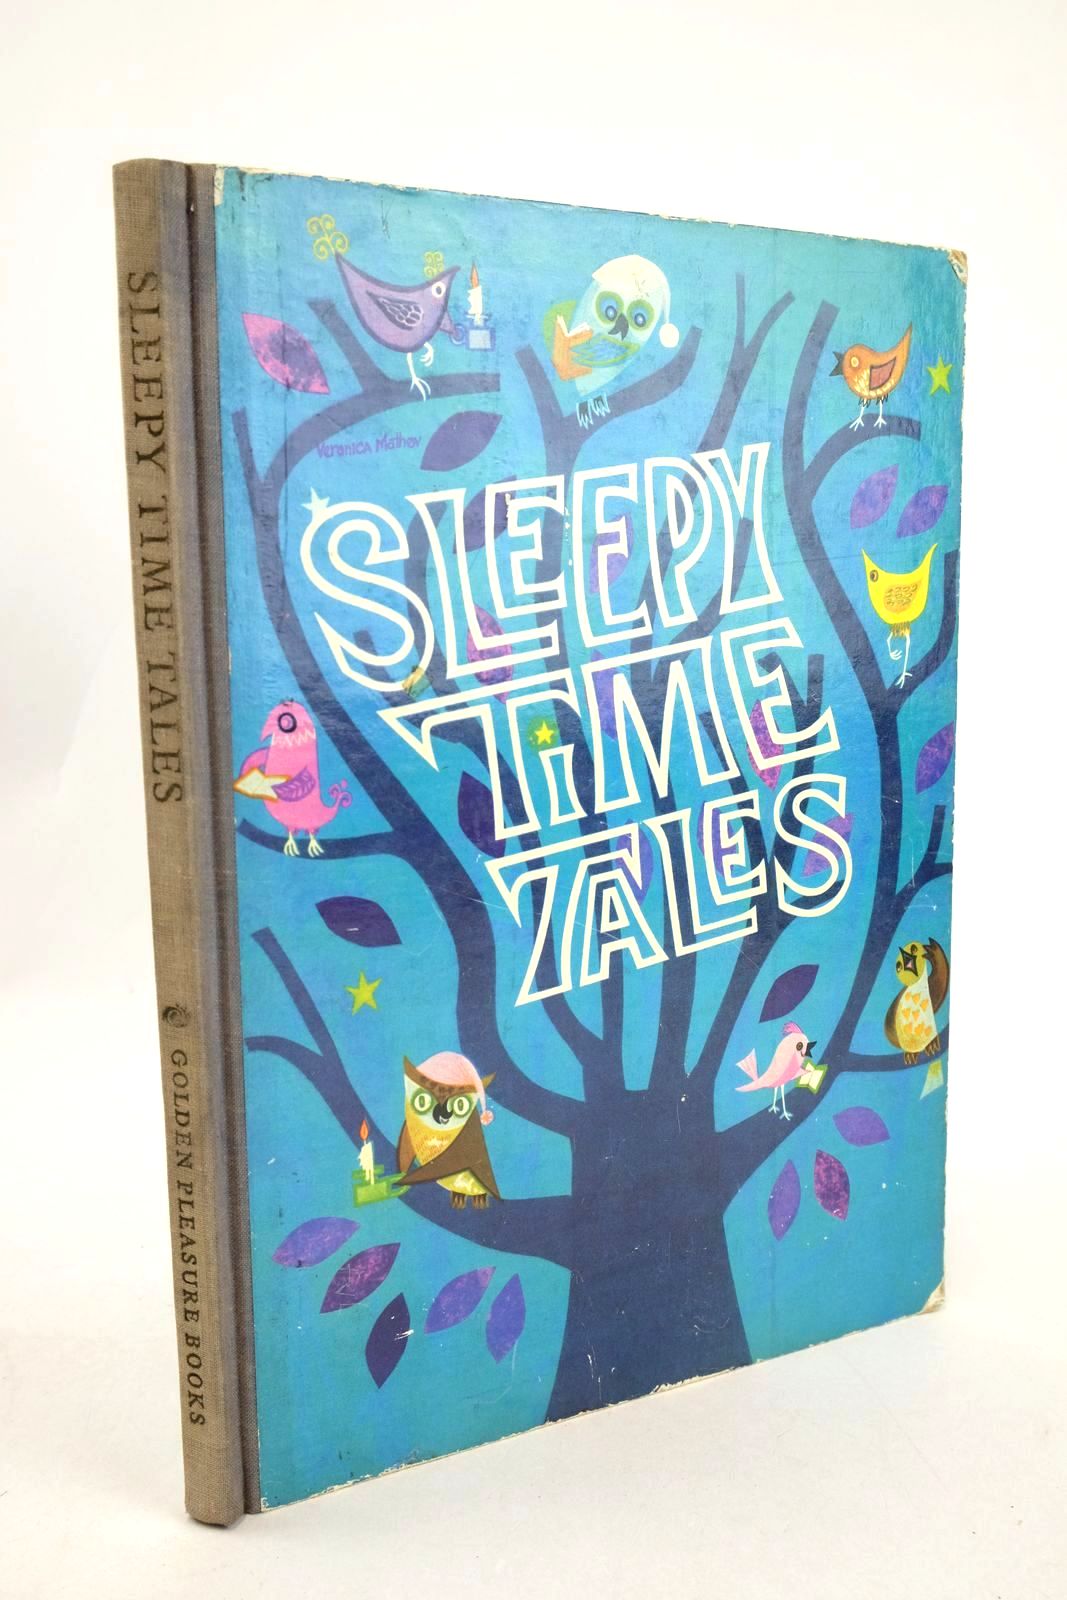 Photo of SLEEPY TIME TALES written by Jackson, Kathryn Lowrey, Janette Sebring Krauss, Ruth et al, illustrated by Scarry, Richard Provensen, Alice Provensen, Martin et al., published by Golden Pleasure Books Ltd. (STOCK CODE: 1327755)  for sale by Stella & Rose's Books